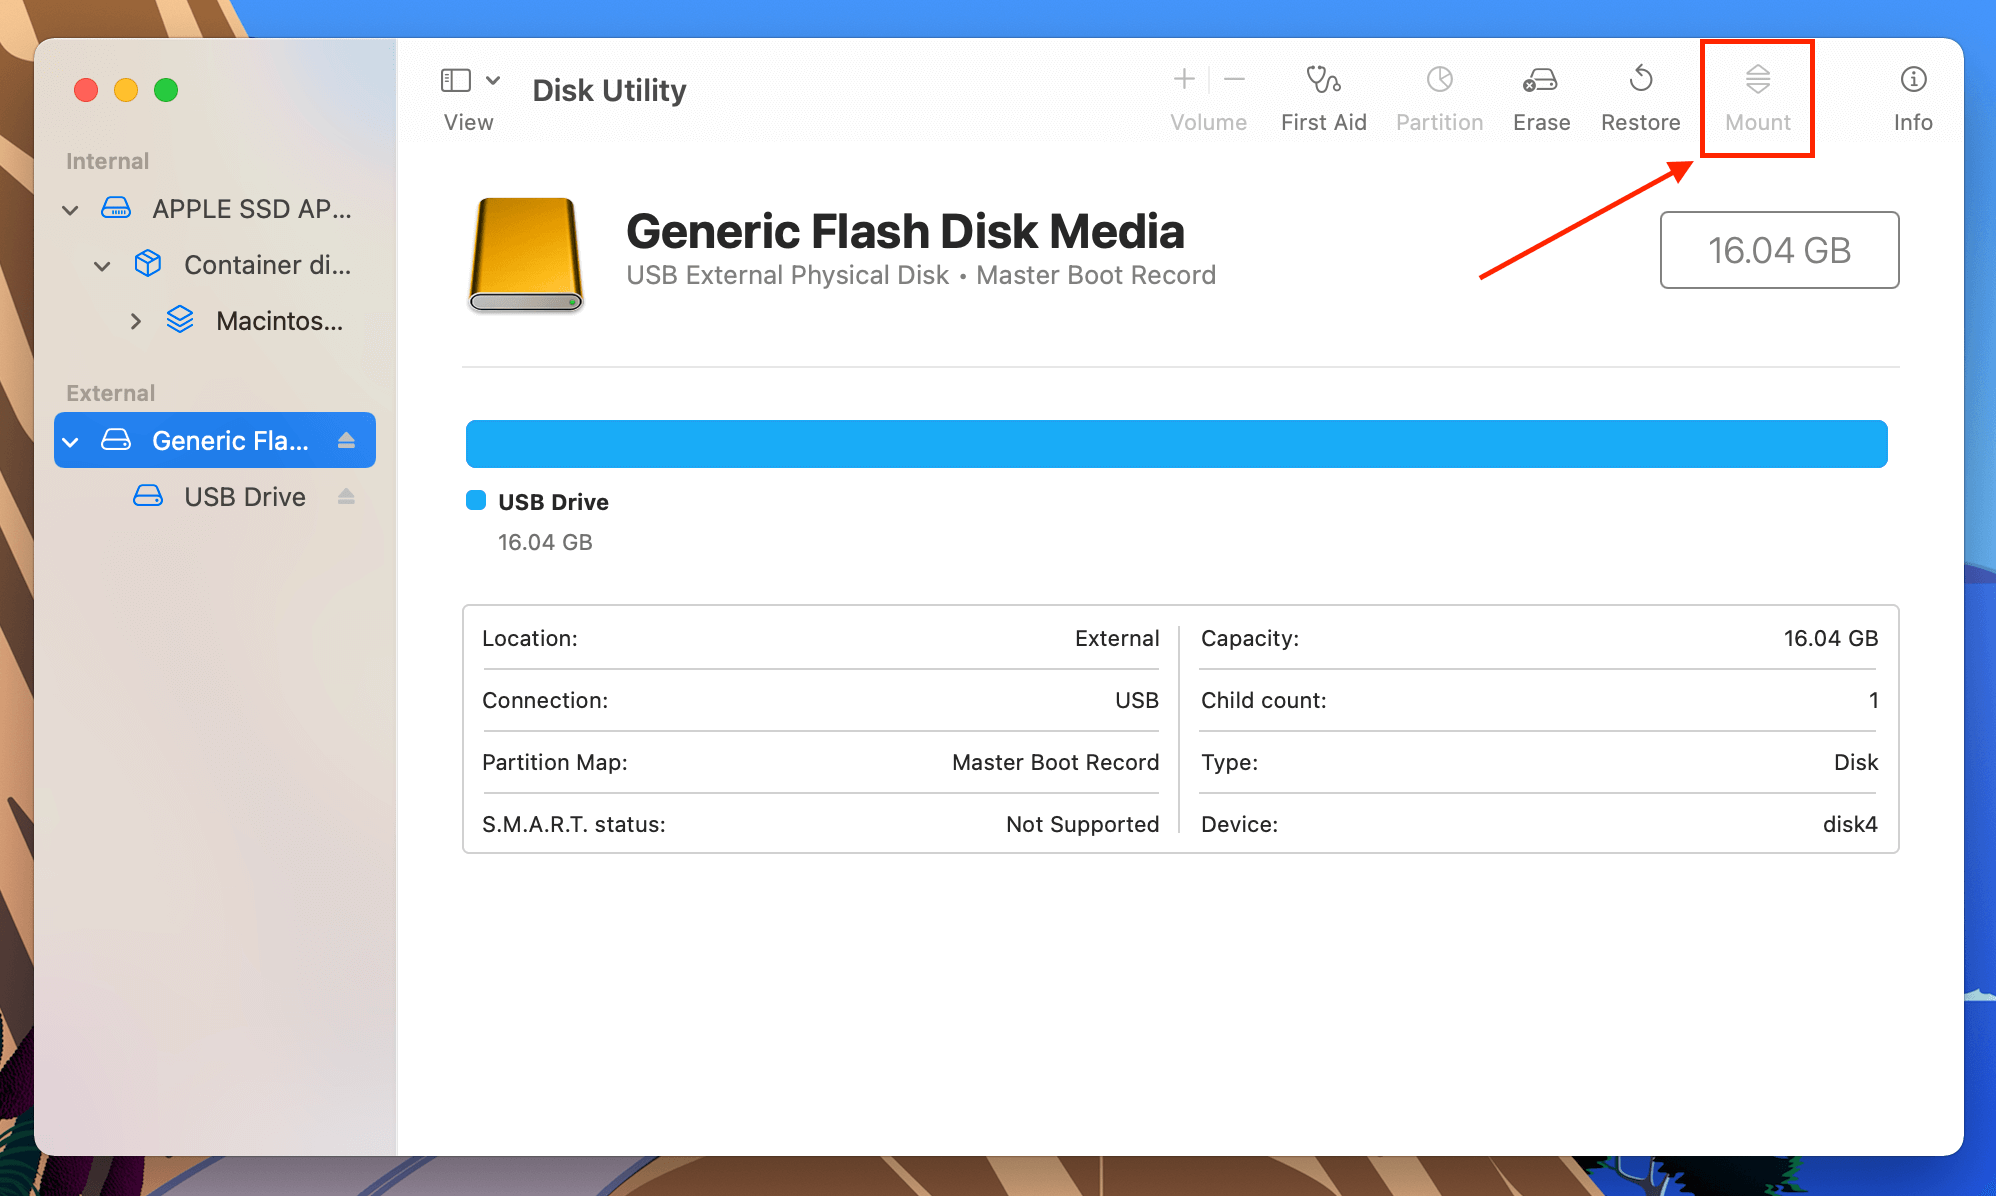 Mount button in the Disk Utility window